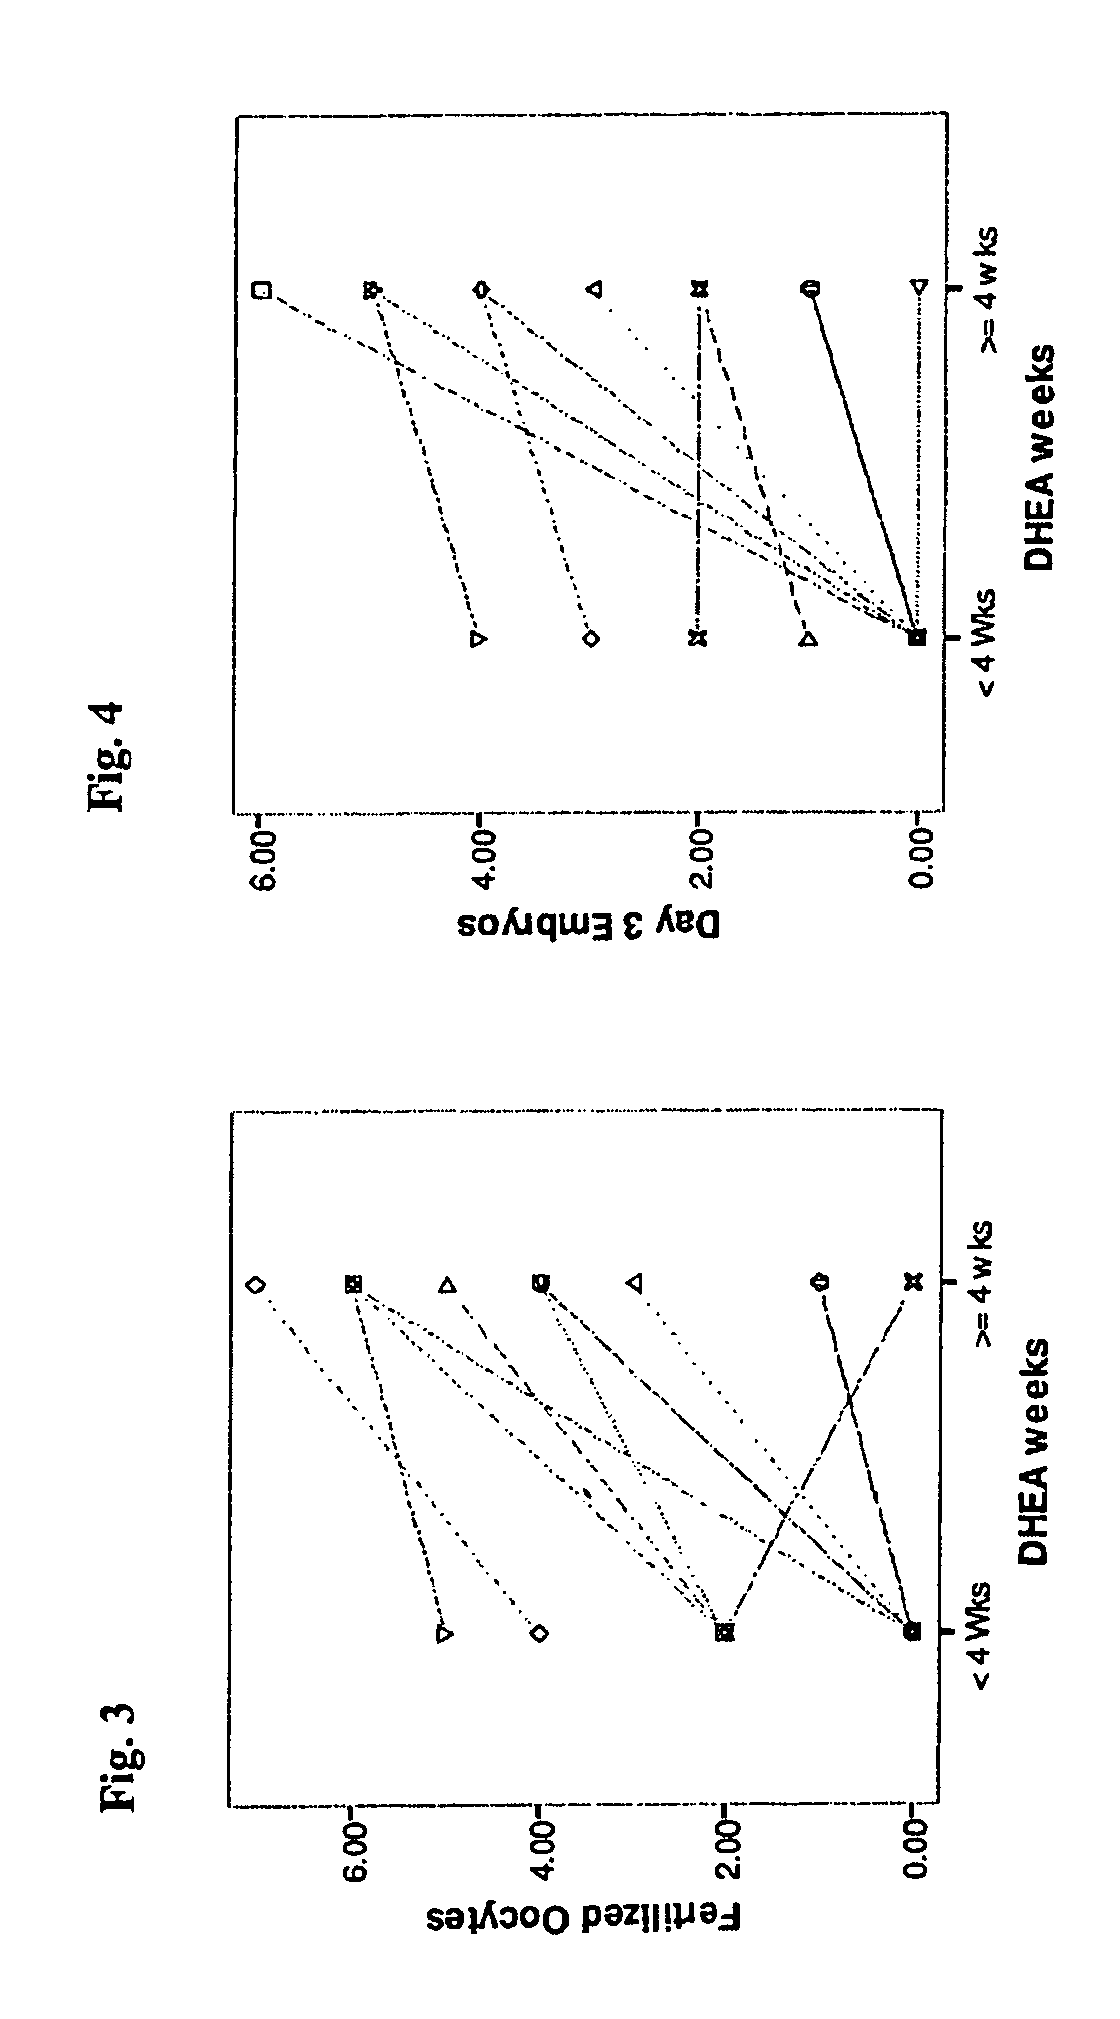 Method of improving cumulative embryo score and quantity of fertilized oocytes, increasing euploidy rate and of normalizing ovarian function using an androgen such as dehydroepiandrosterone